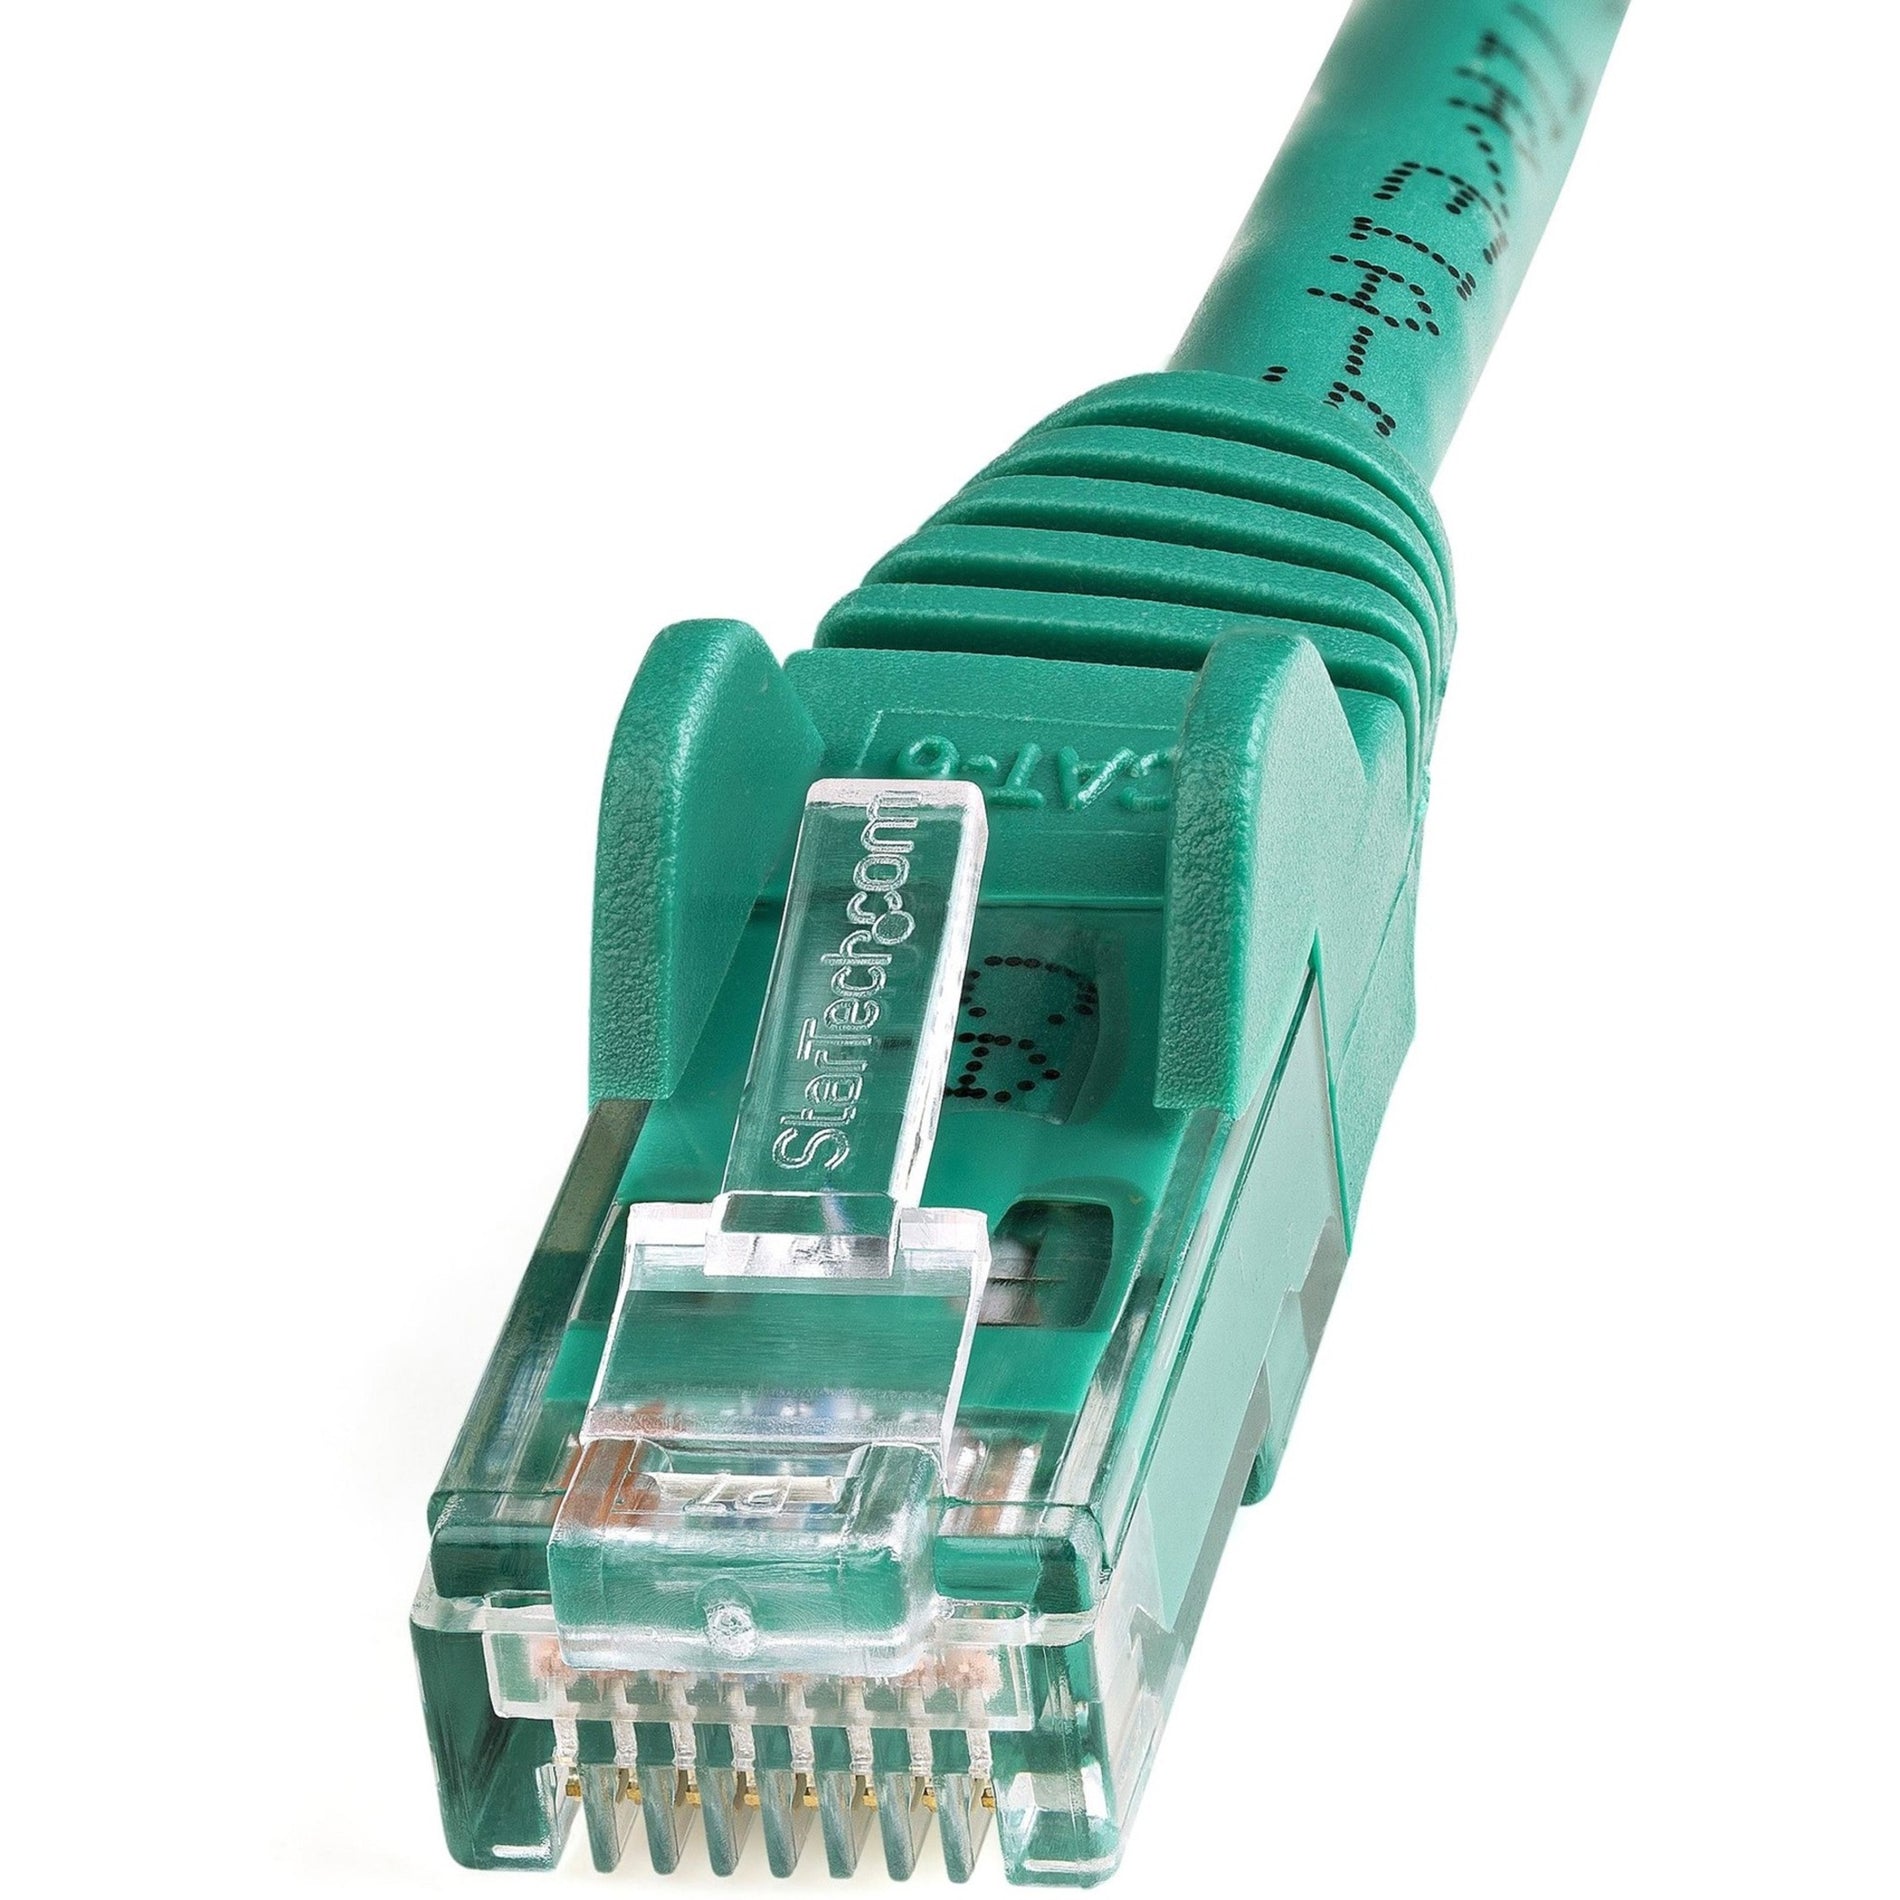 StarTech.com N6PATCH8GN Cat6 Cable, 8 ft Green Ethernet Cable, Snagless RJ45 Connectors